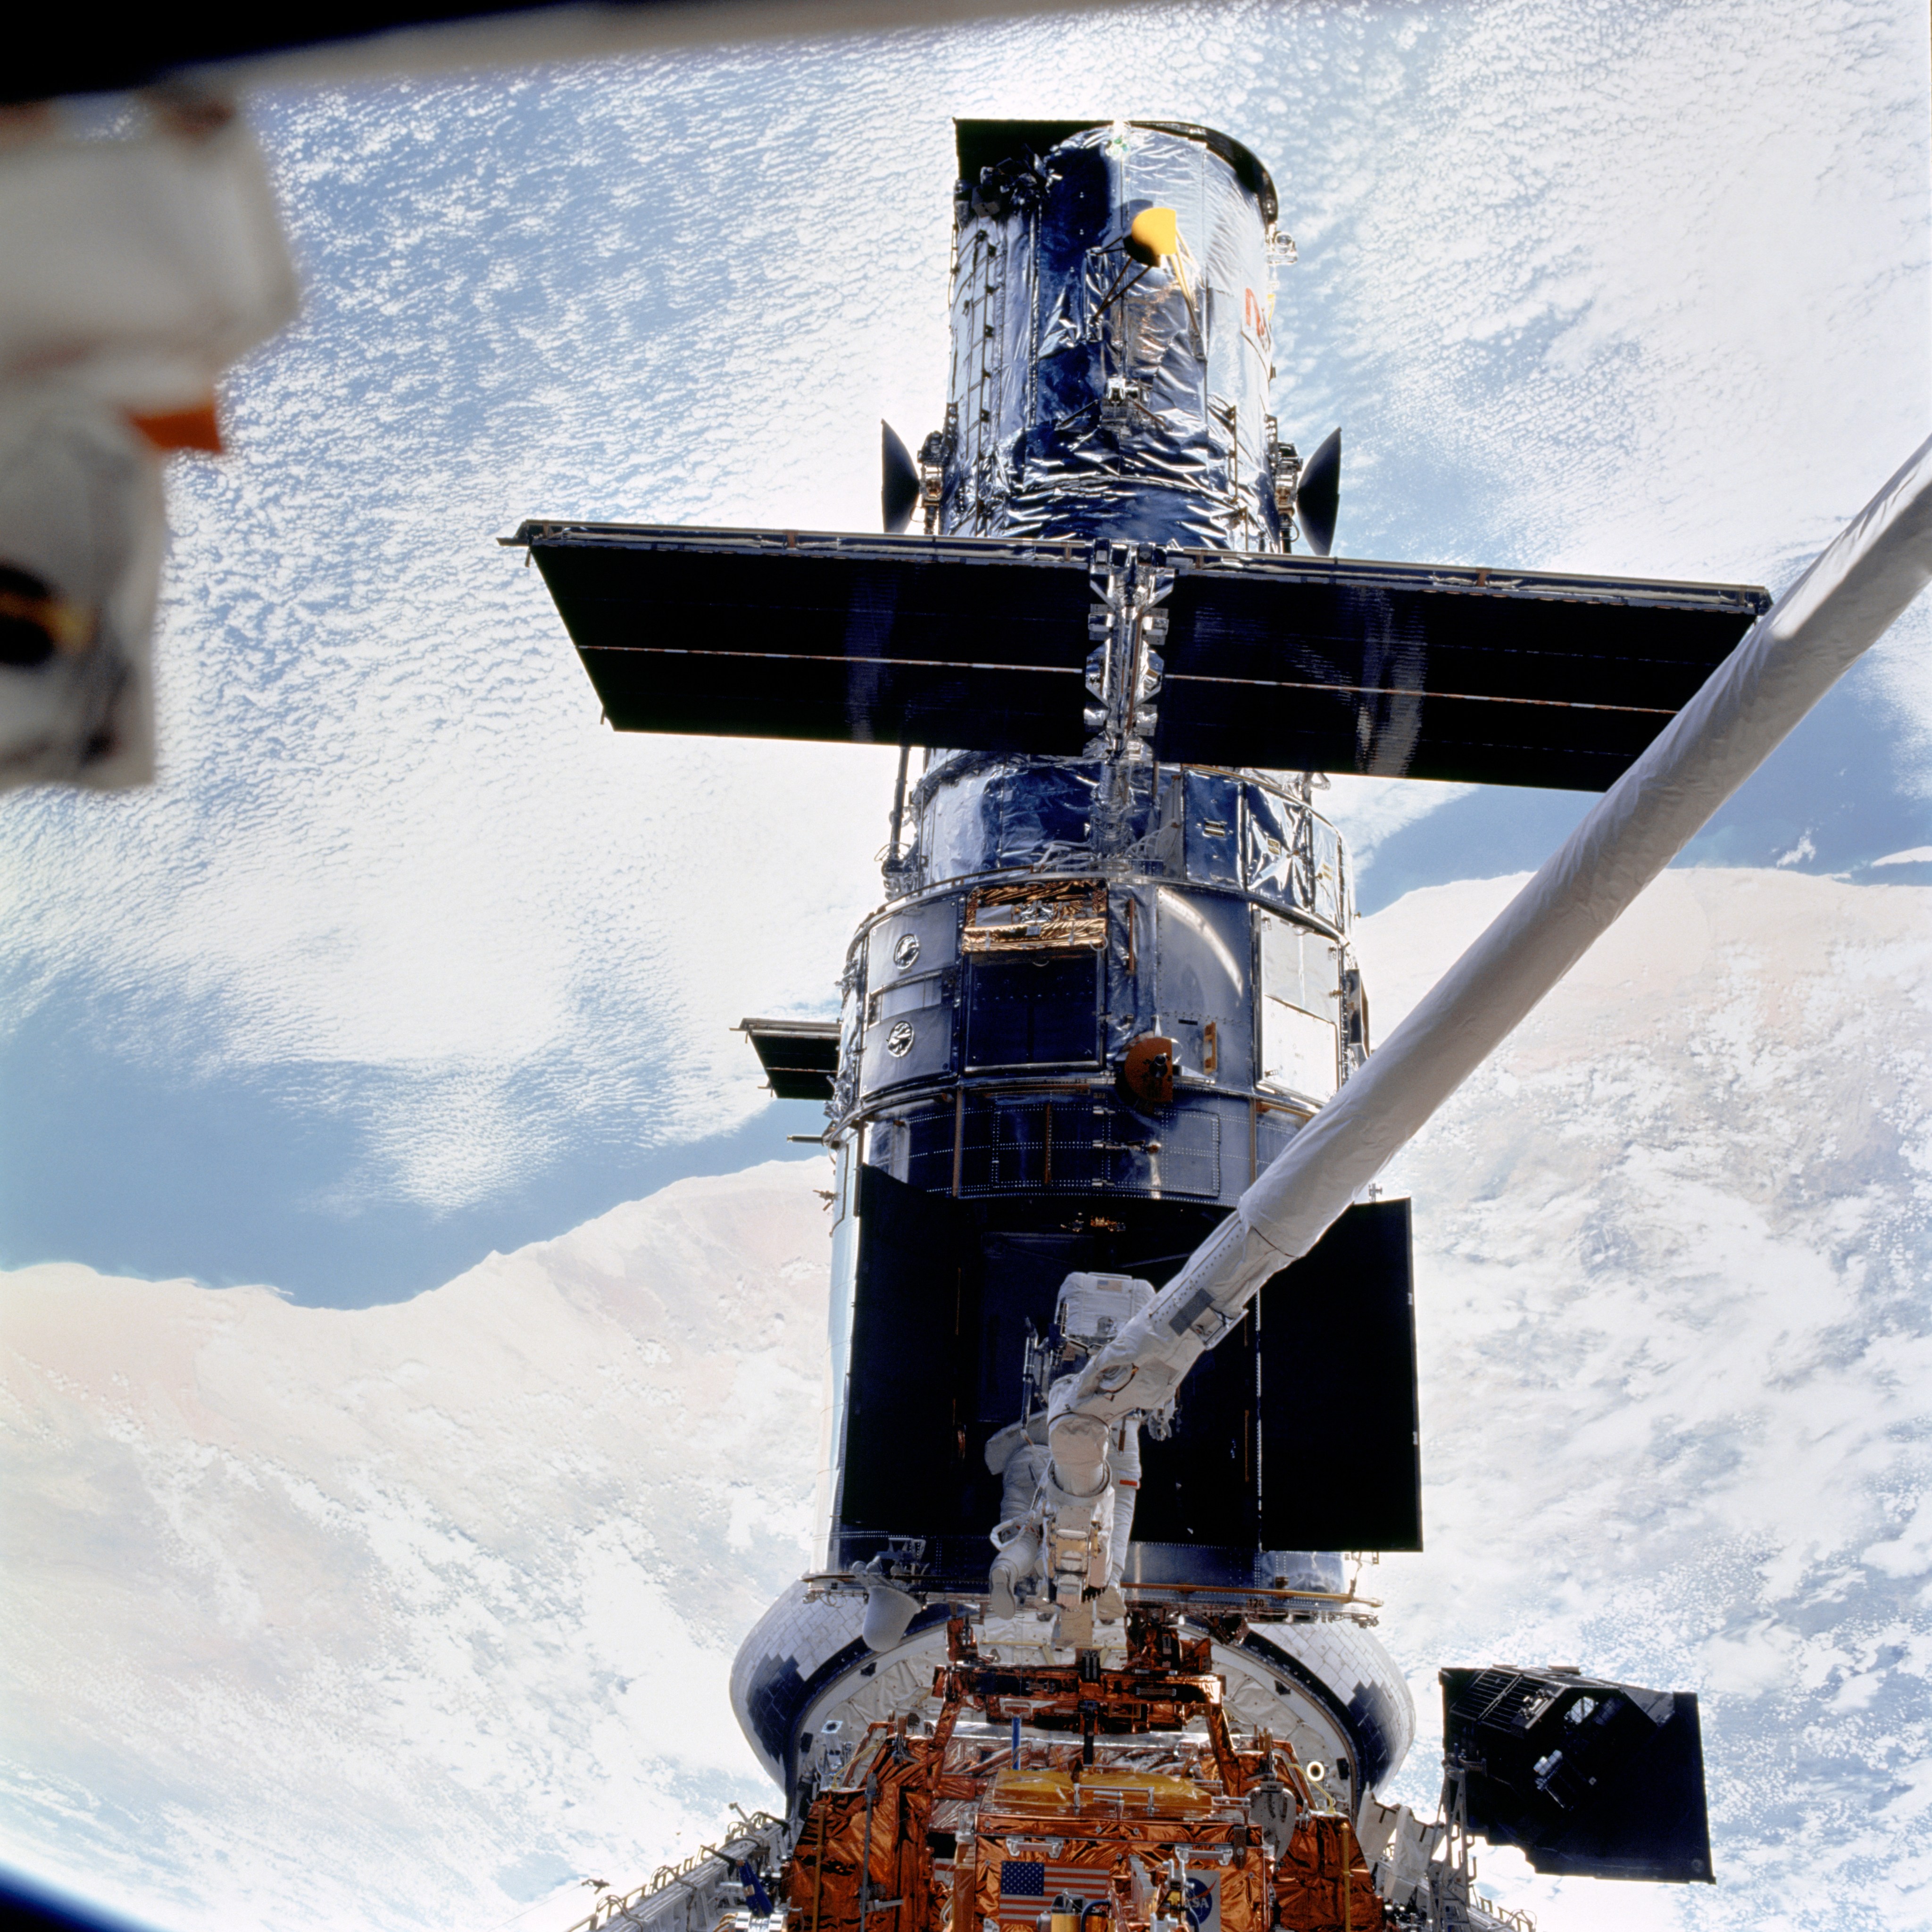 Hubble is framed by a blue and cloudy Earth as astronauts work on the telescope, one perched on the shuttle's robotic arm.